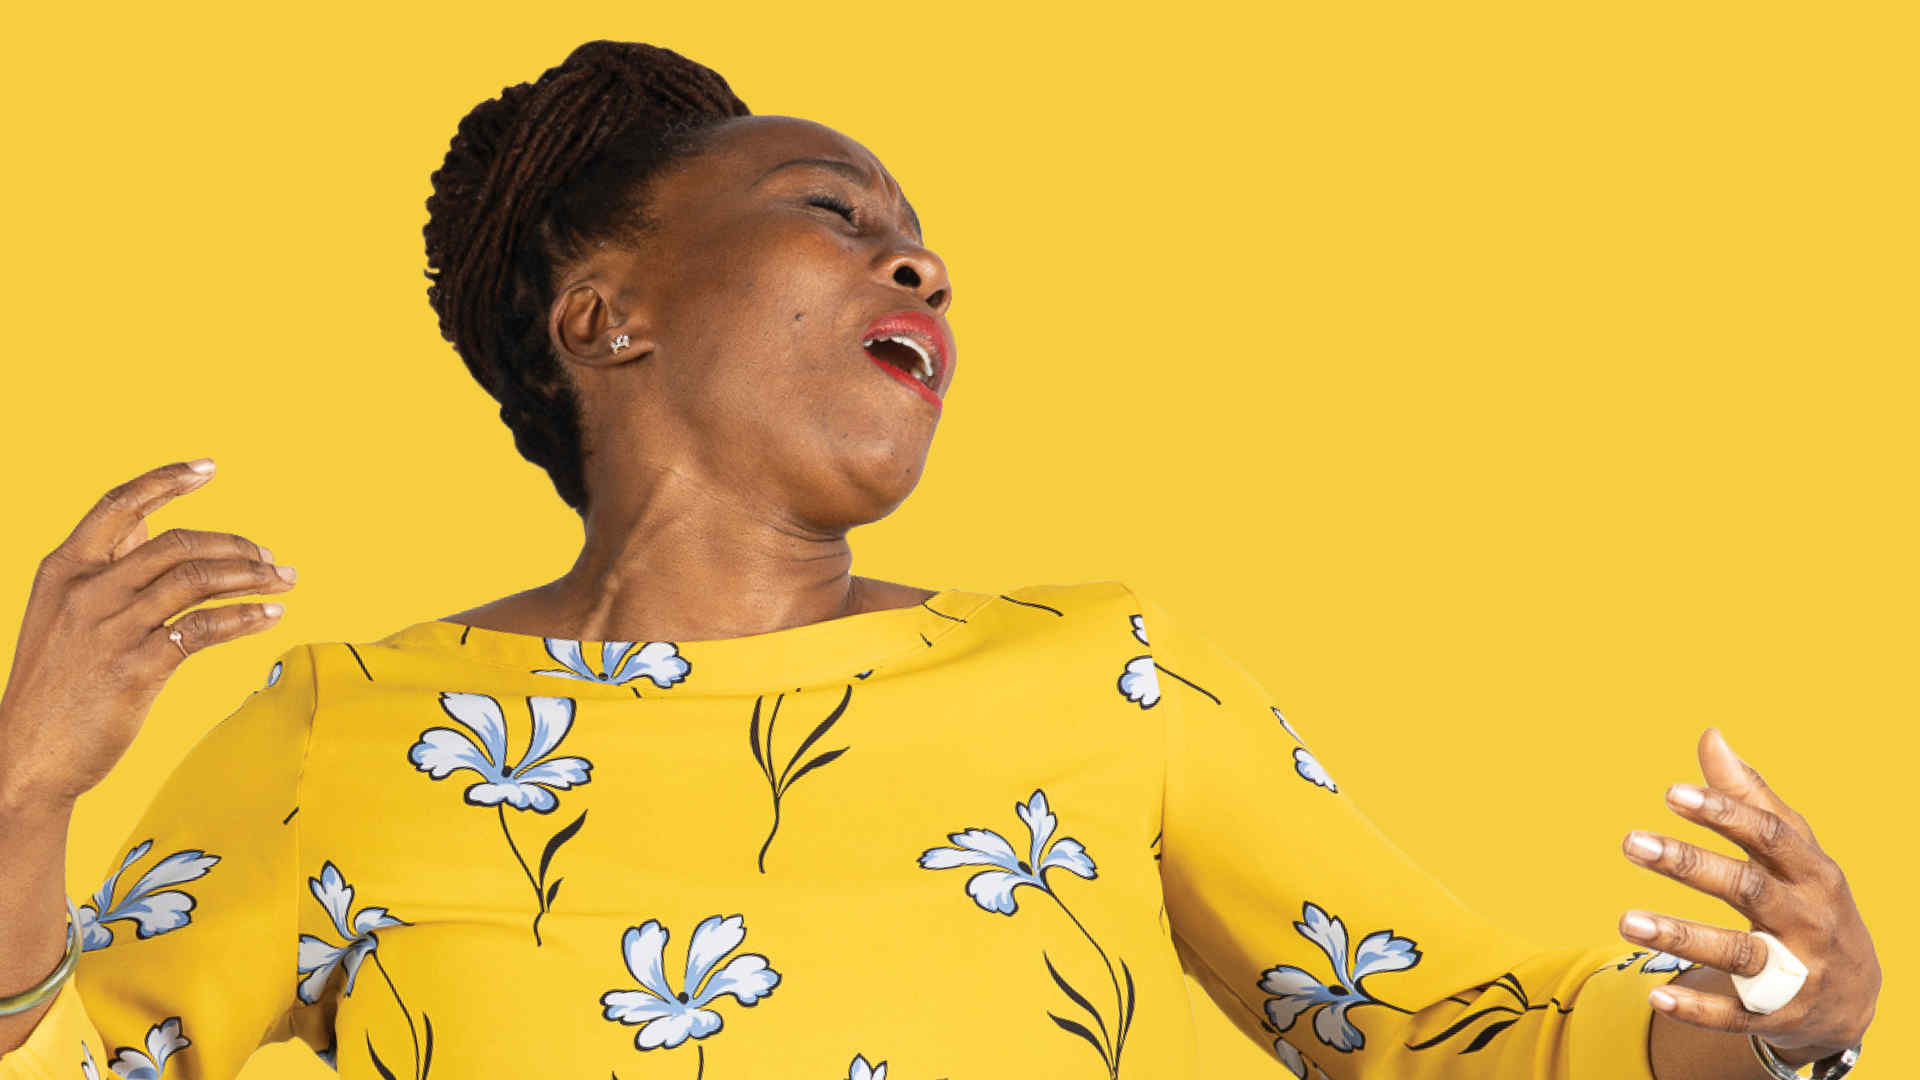 A woman wearing a yellow dress with flowers on it strikes an expressive pose and appears to be singing. The background is yellow.